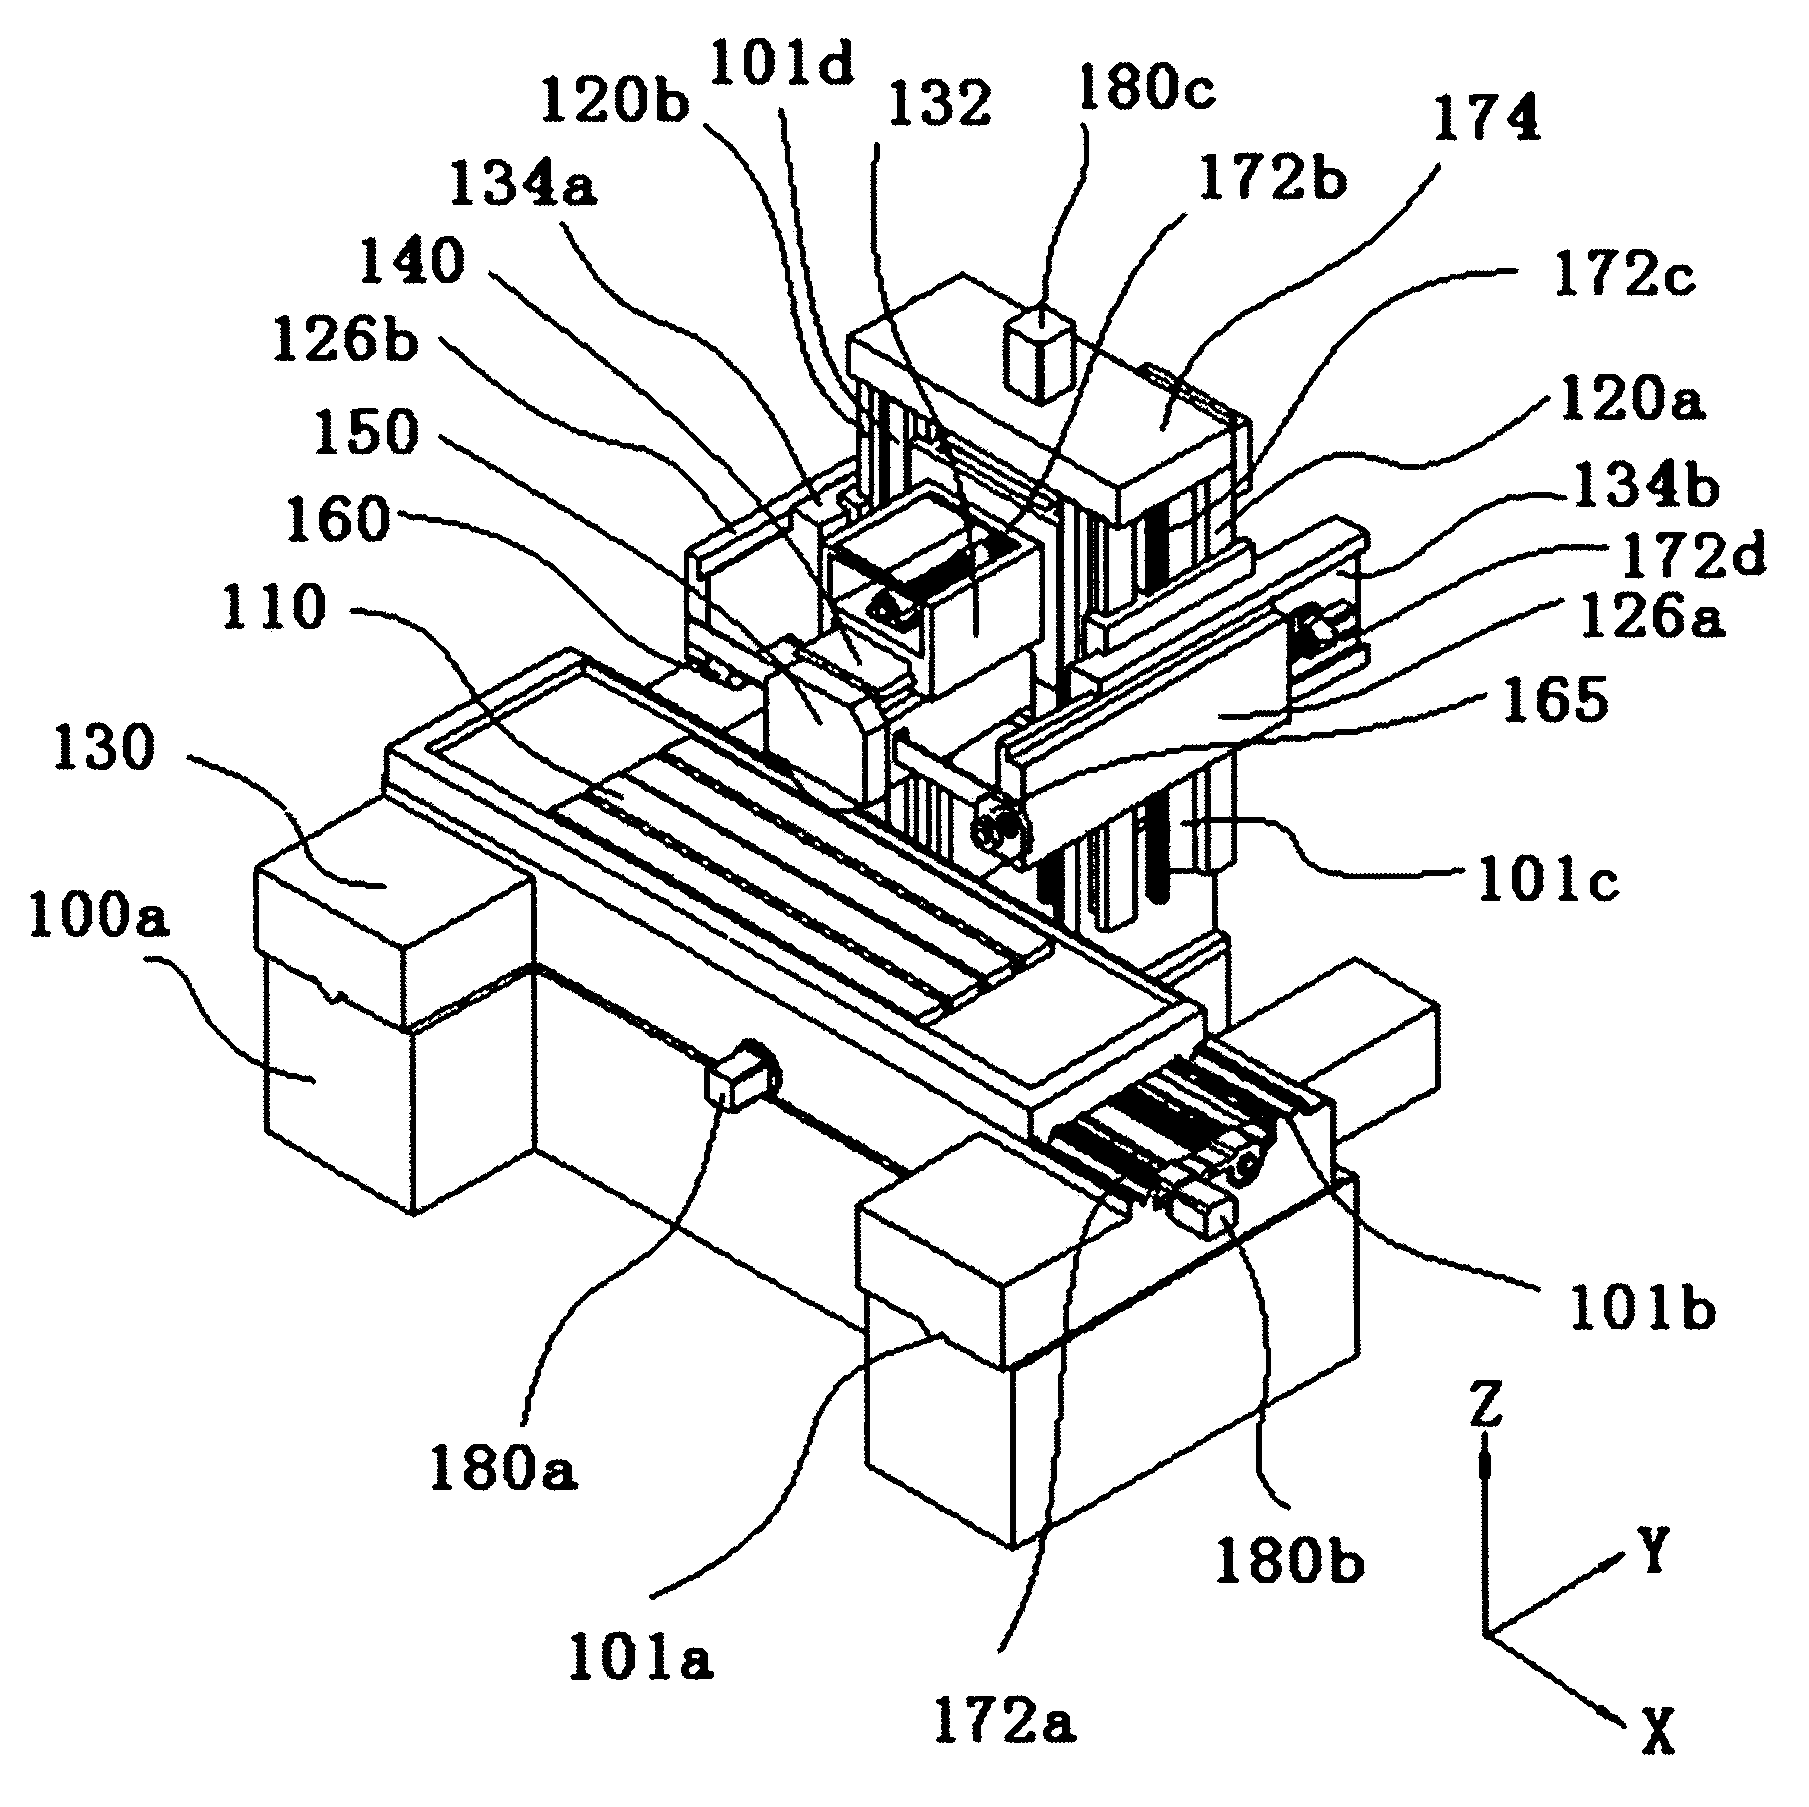 Multi-carriage symmetrical numerically controlled coordinate grinding machine